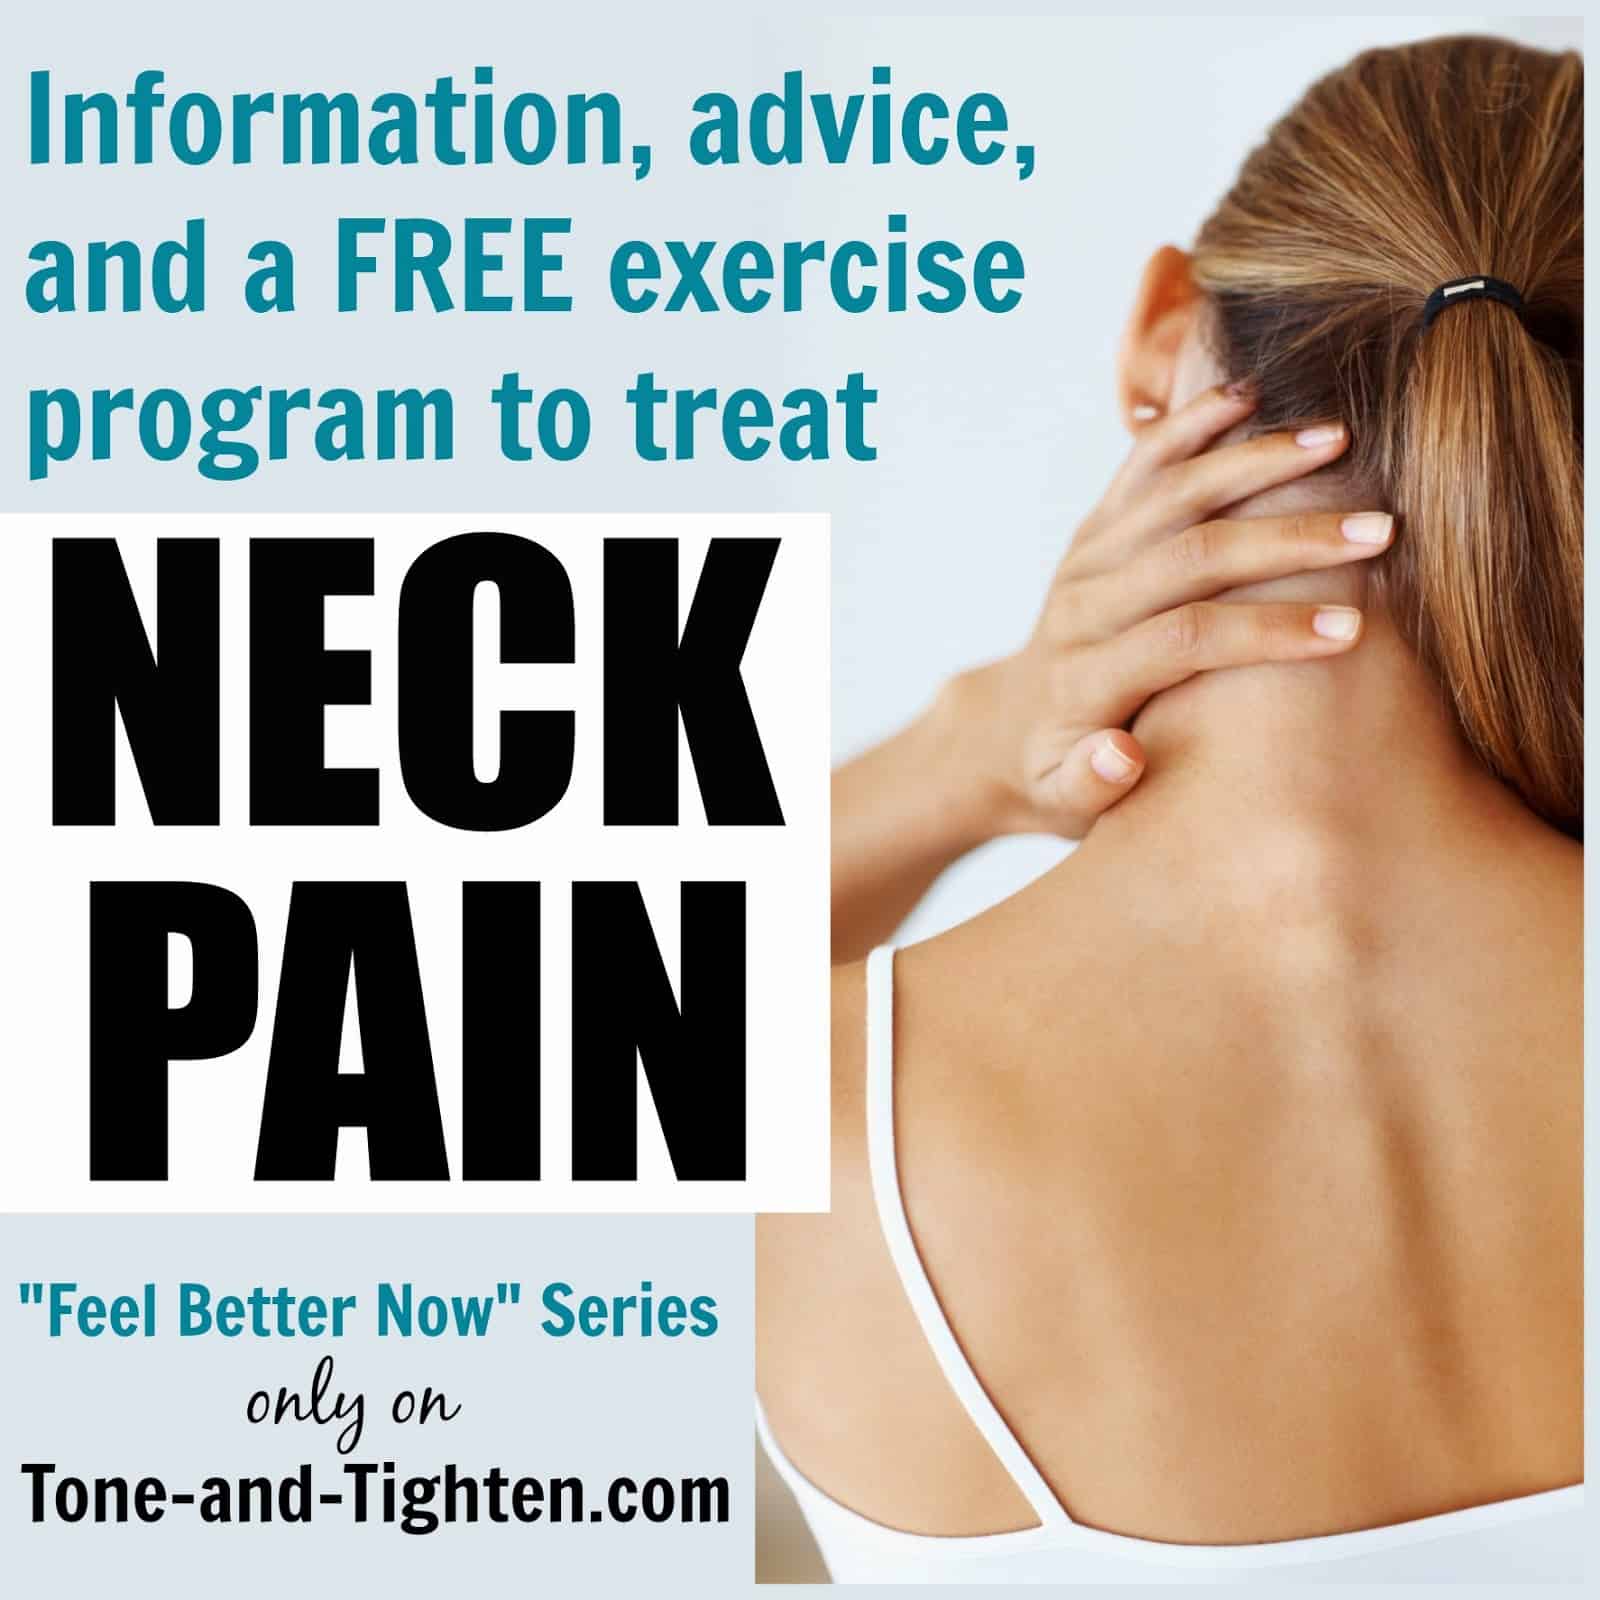 Feel Better Now Series  How to treat neck pain  Best exercises to ...